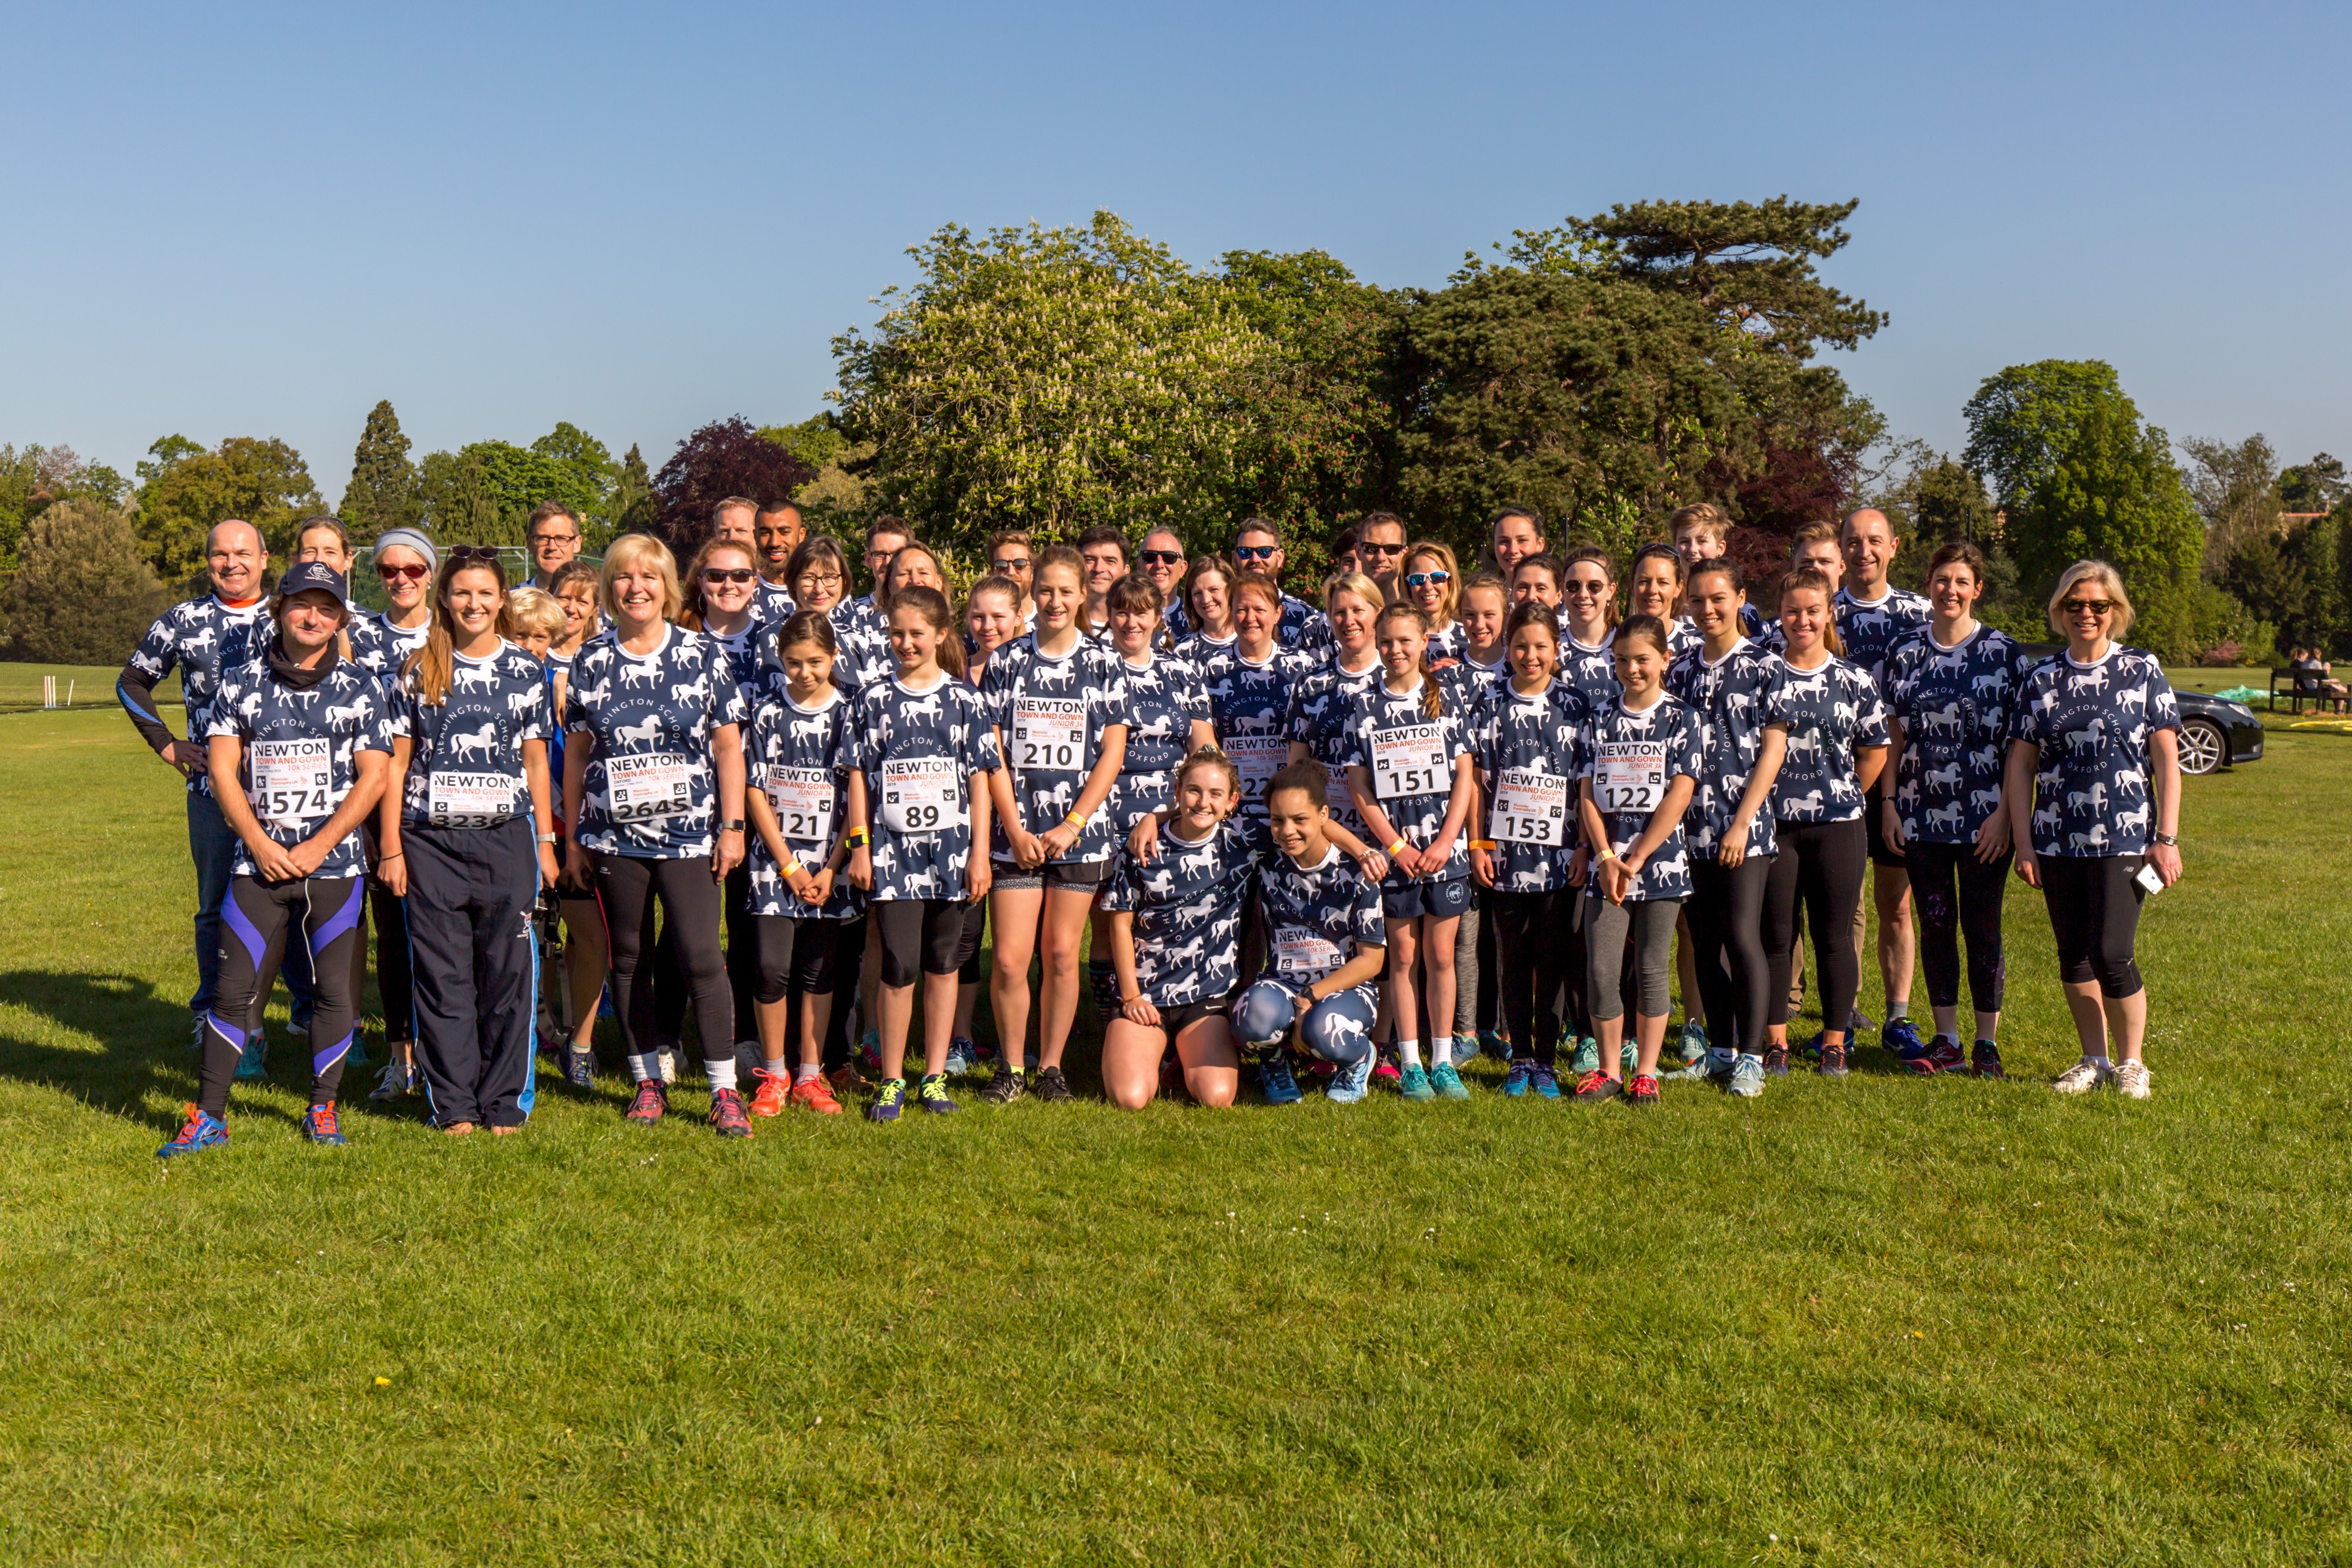 Group picture of Headington School in their running hear, all stood in the park